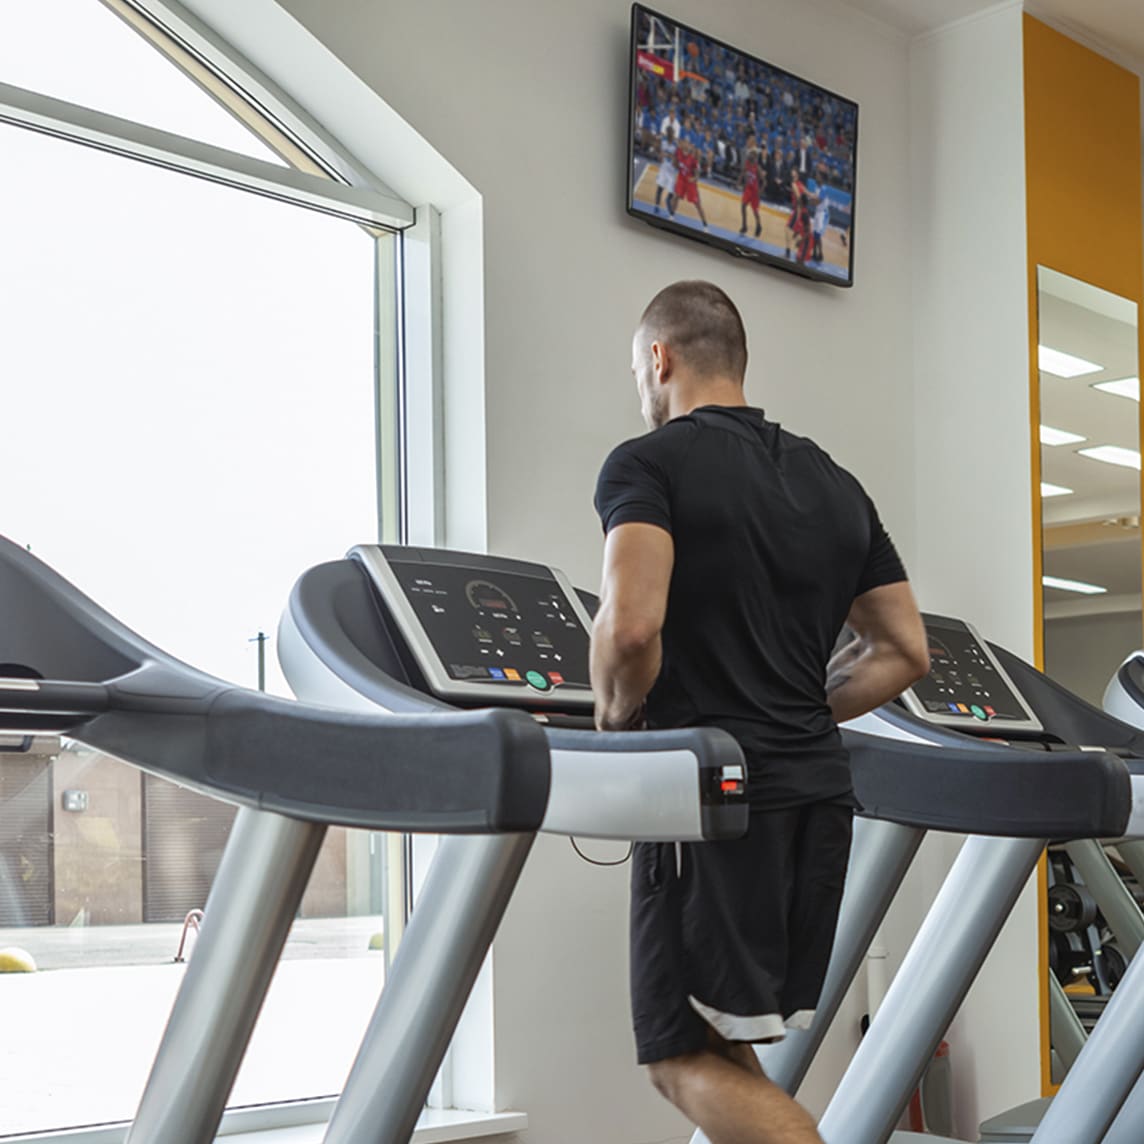 Man at gym watching TV while running on treadmill